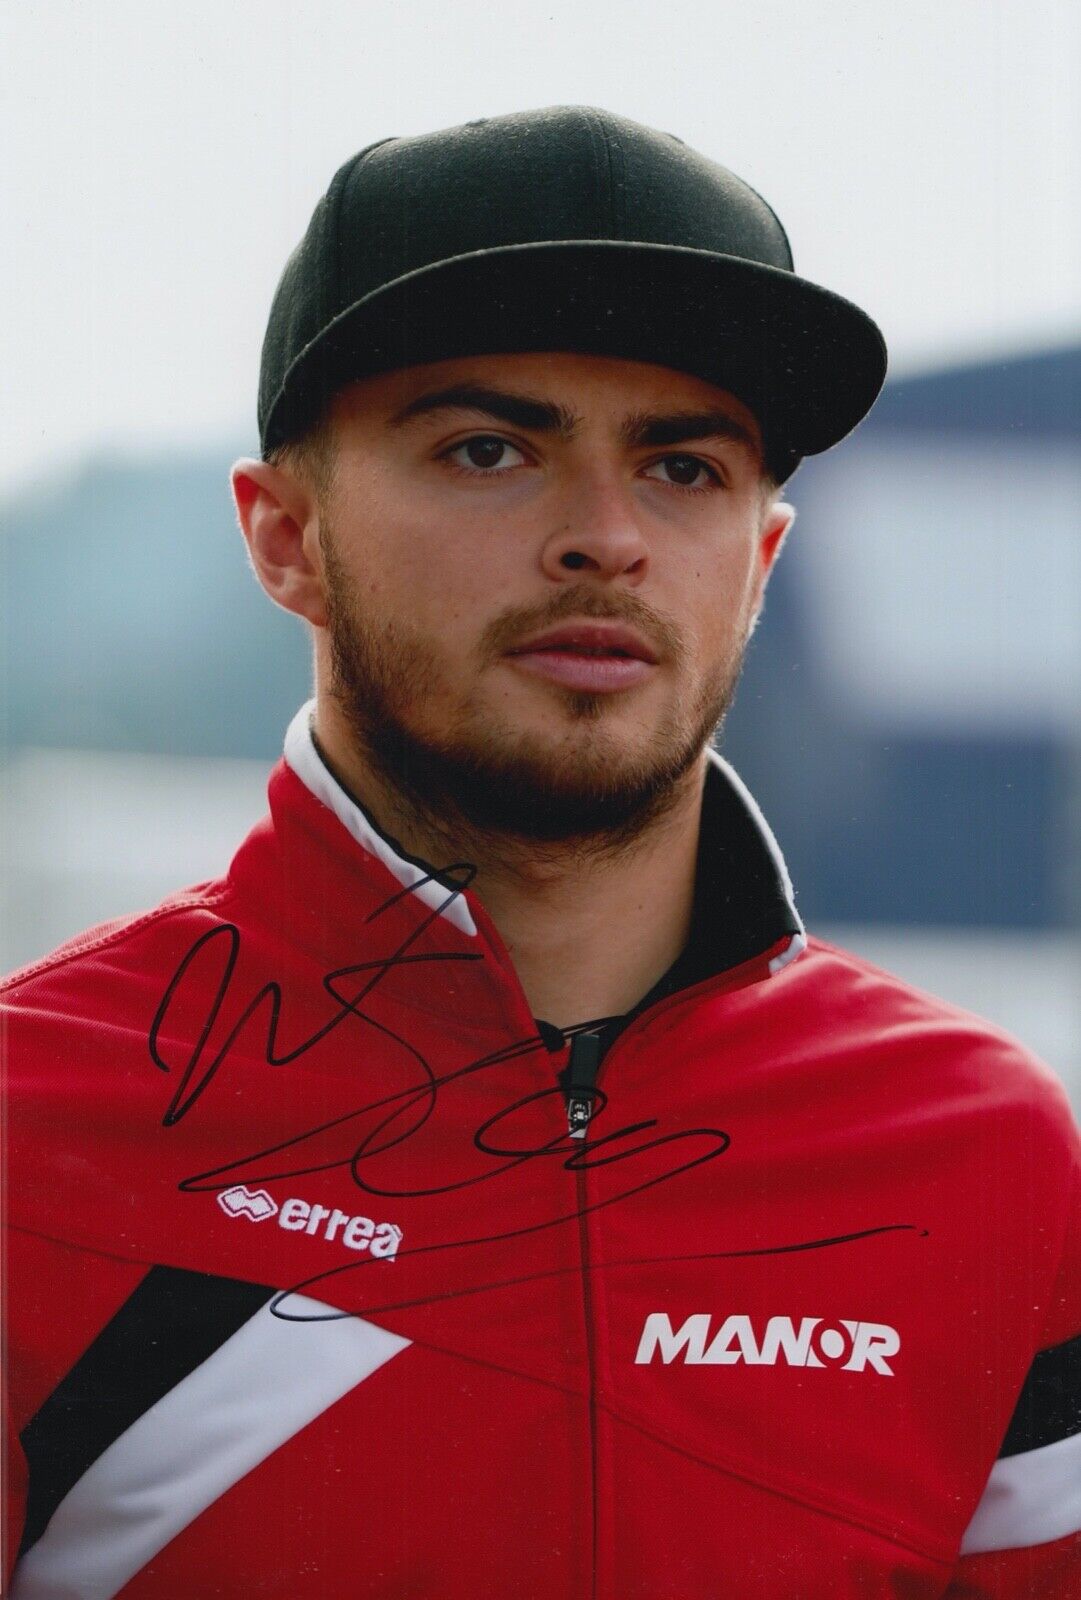 Will Stevens Hand Signed 12x8 Photo Poster painting F1 Autograph Manor Marussia 8